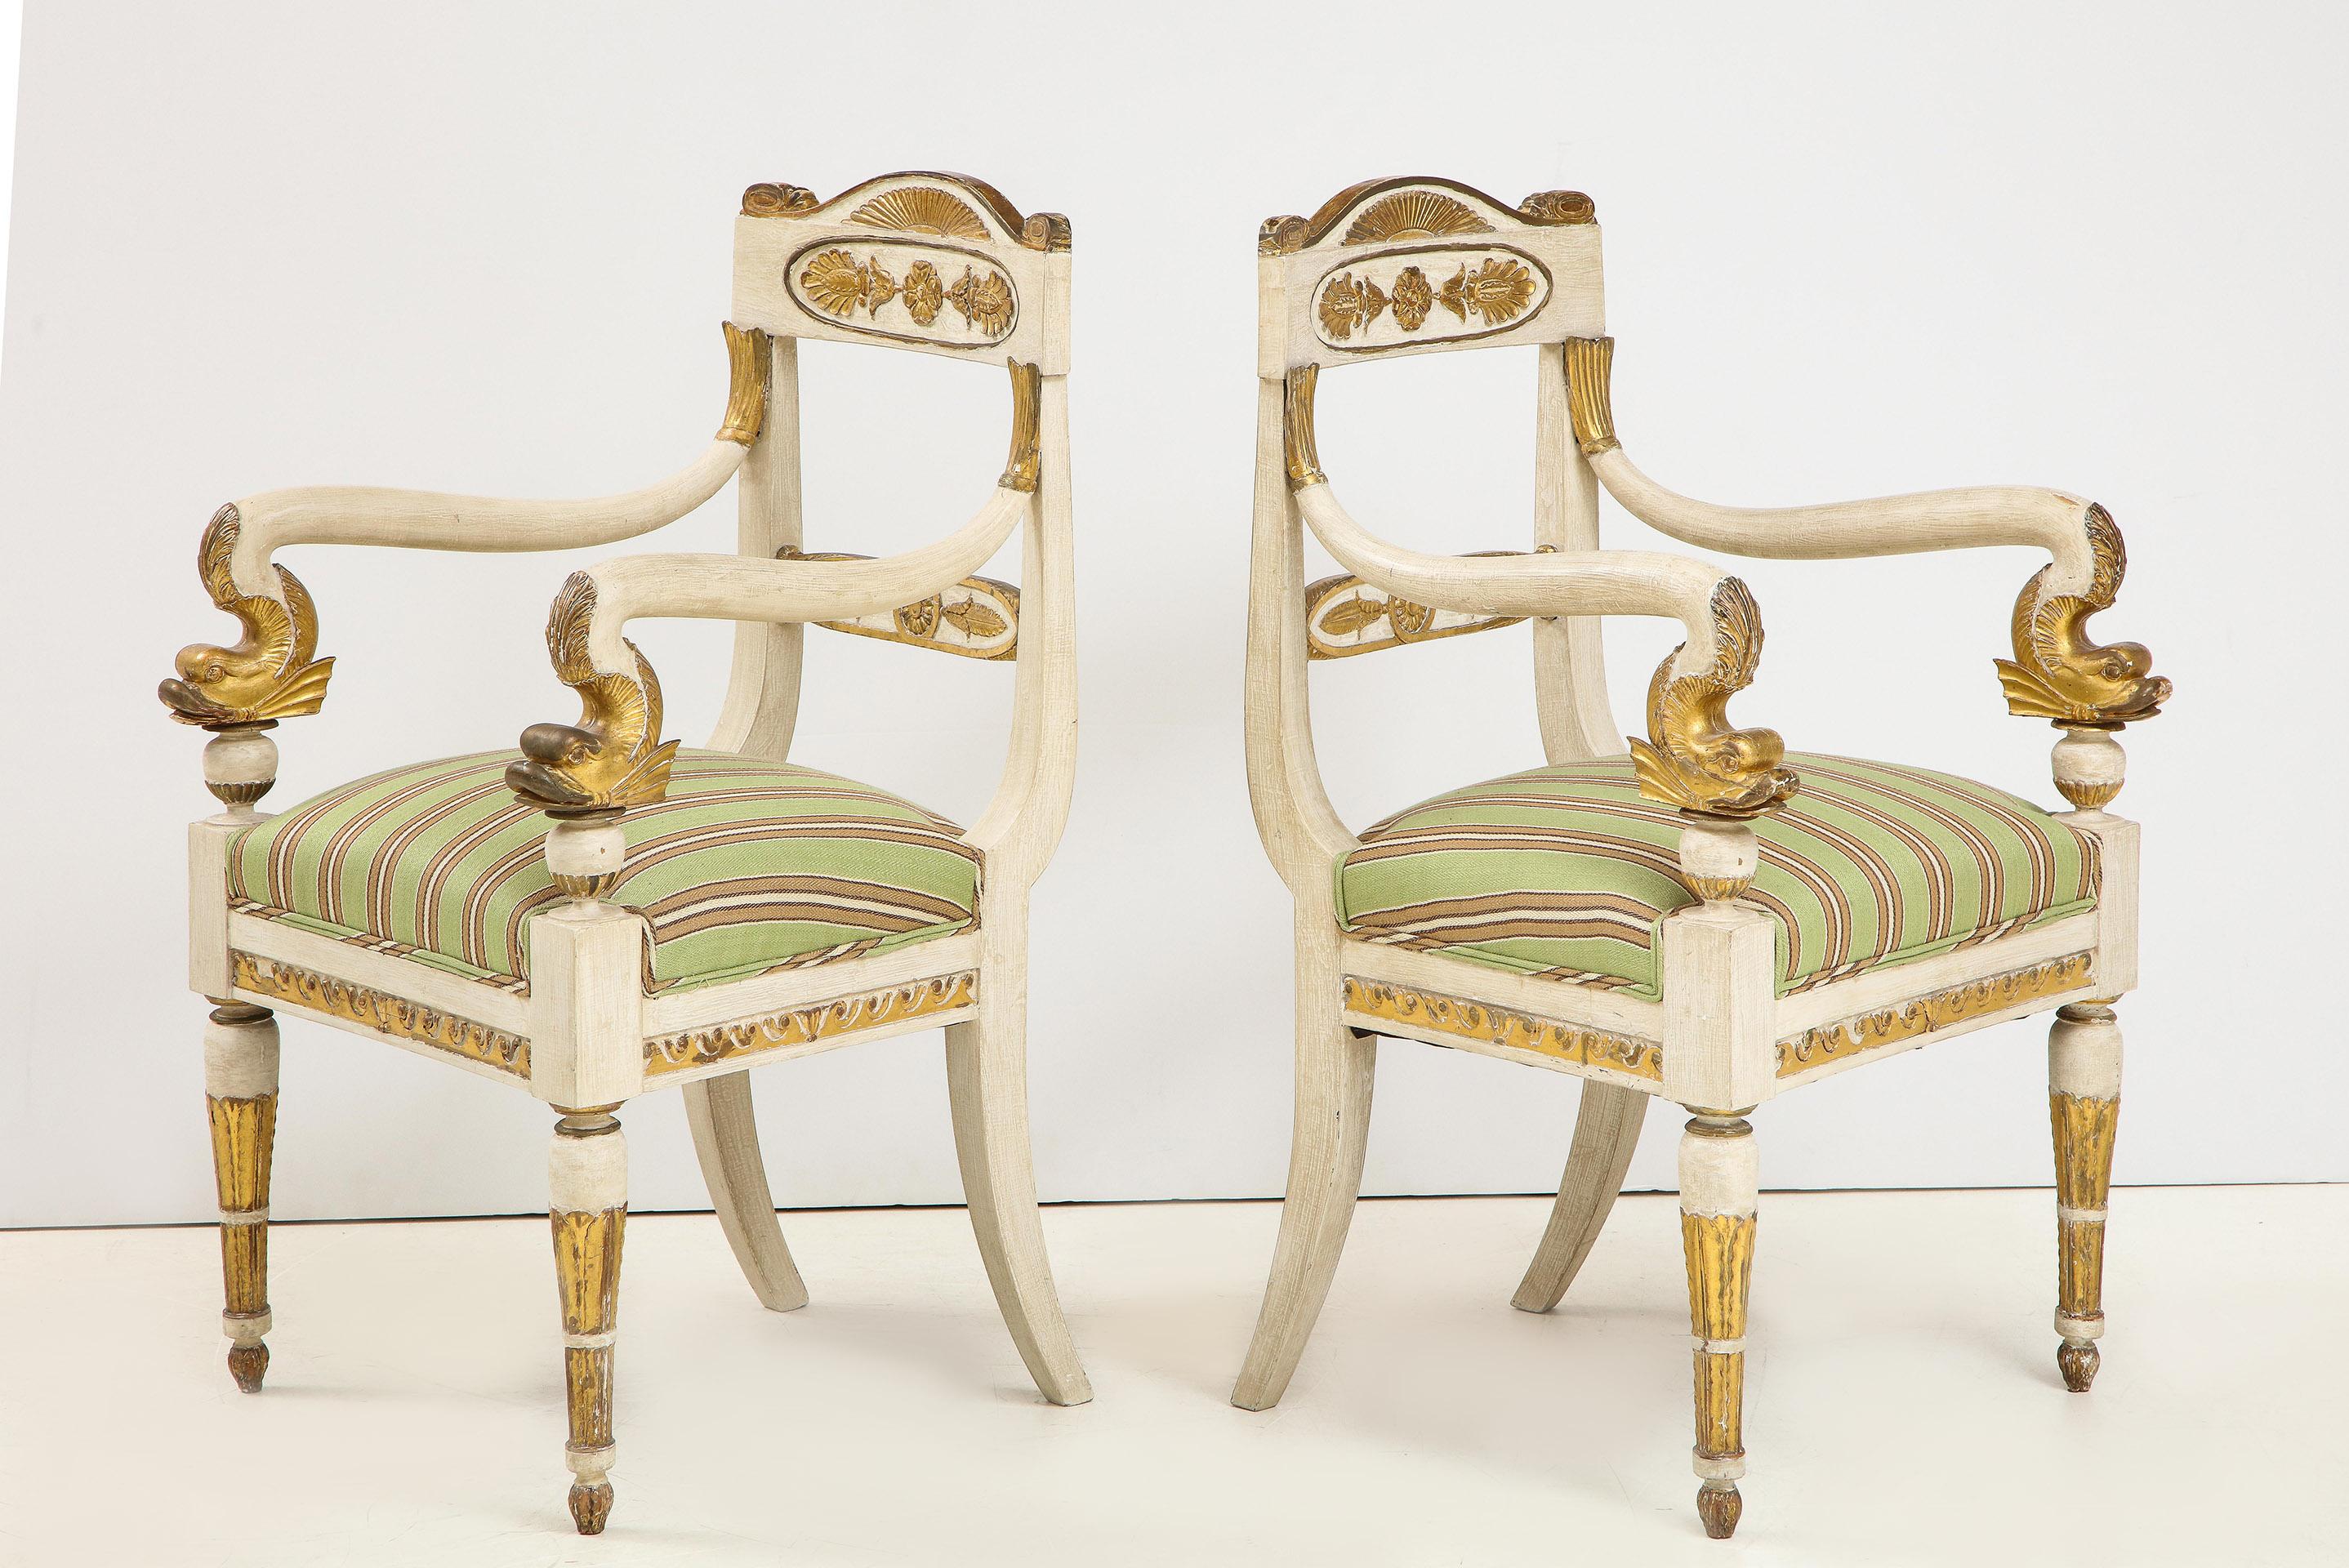 Pair of Italian Empire white painted and gilt arm chairs with carved gilt dolphin arms.